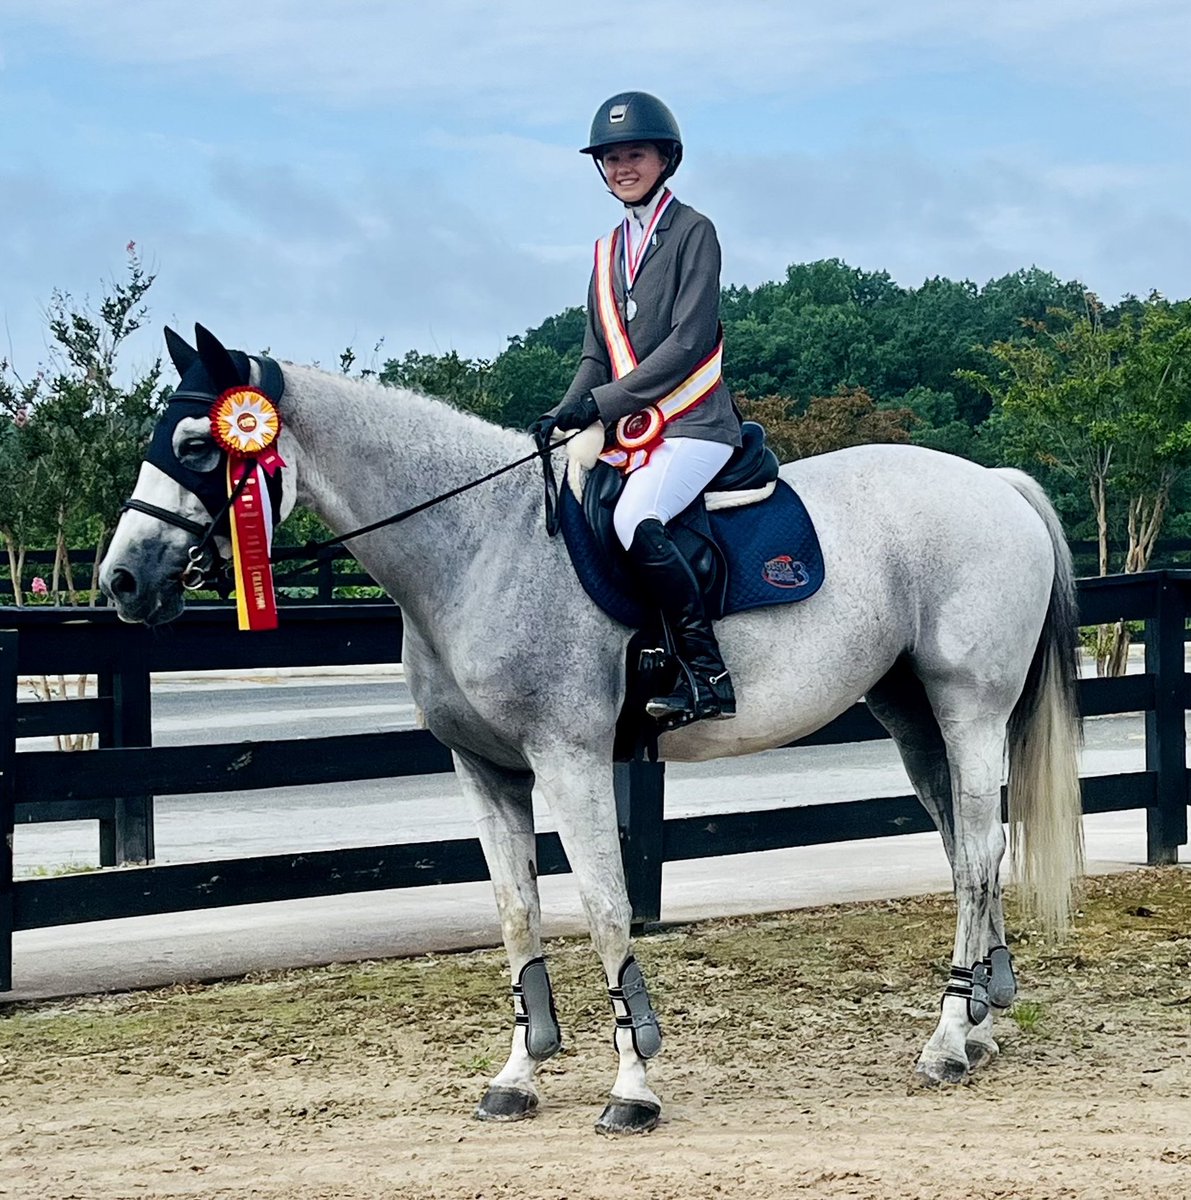 Silver medal 🥈 in the USHJA Children’s Individual Zone Jumper Championships for Cierra & Generosa MK 👏🏻 One rail all week & a fast jump off to secure her prize! Her amazing team finished just off the podium in the 4th position. ⁦@FoxcroftSchool⁩ is so proud of this pair 💕